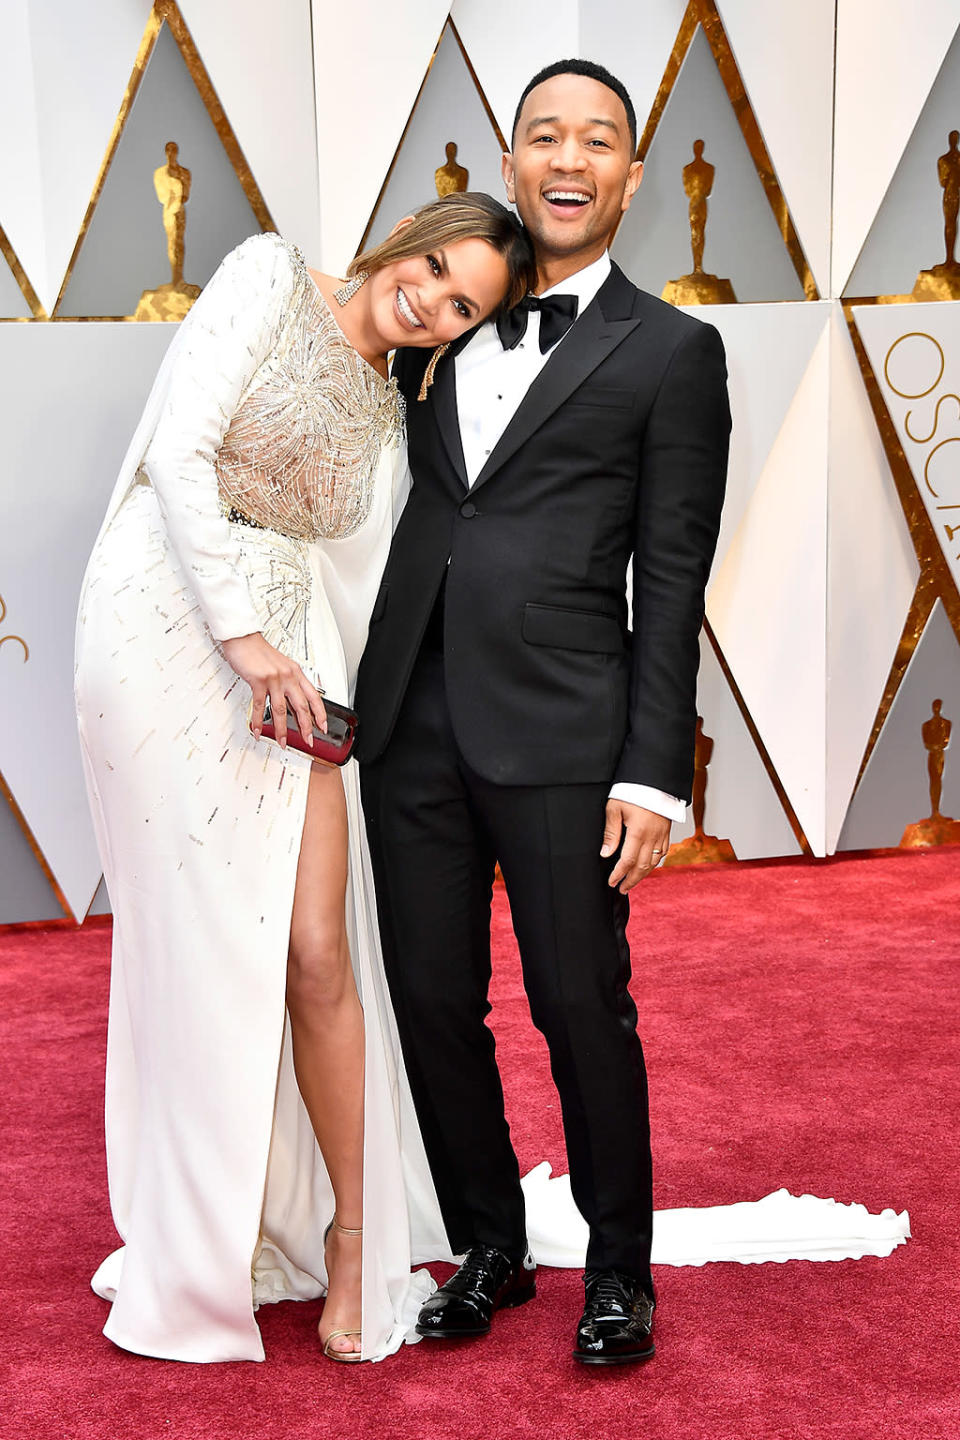 <p>Model Chrissy Teigen and singer John Legend attend the 89th Annual Academy Awards at Hollywood & Highland Center on February 26, 2017 in Hollywood, California. (Photo by Frazer Harrison/Getty Images) </p>